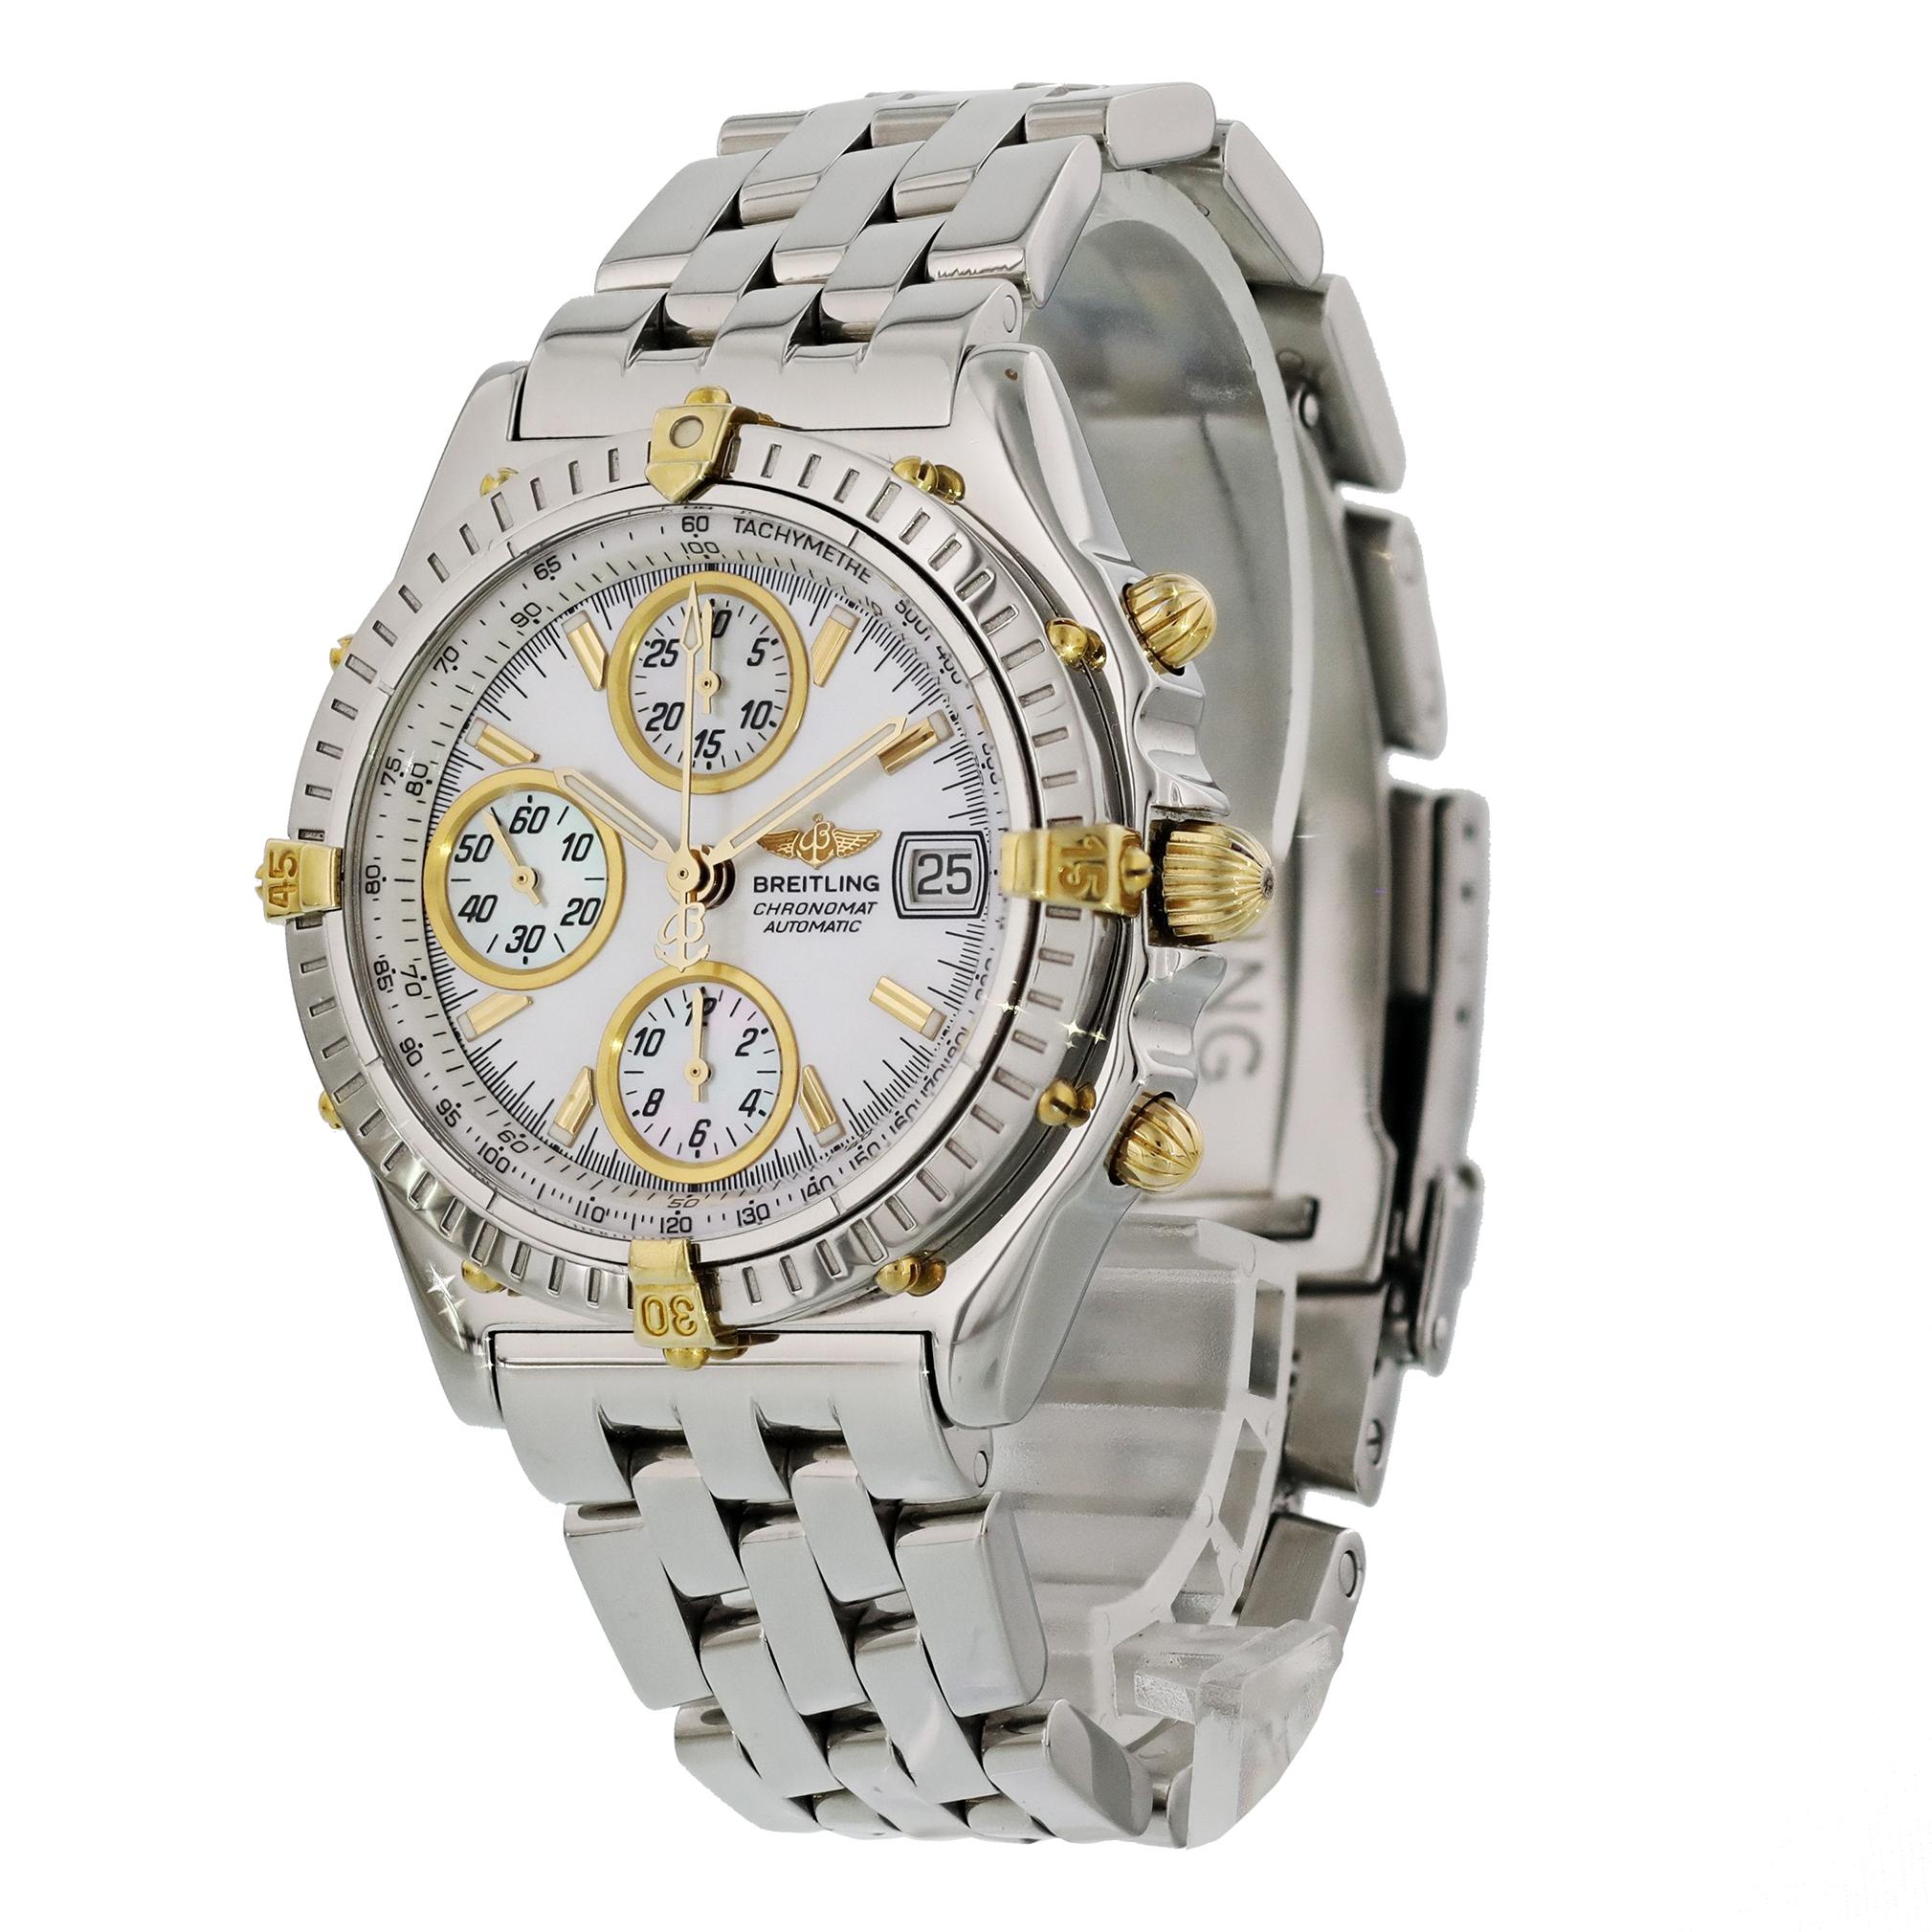 Breitling Chronomat B13050.1 Men's Watch. 
39mm Stainless Steel case. 
Steel and 18K Gold Unidirectional rotating bezel. 
Mother-of-Pearl dial with Luminous Steel hands and index hour markers. 
Minute markers on the outer dial. 
Date display at the